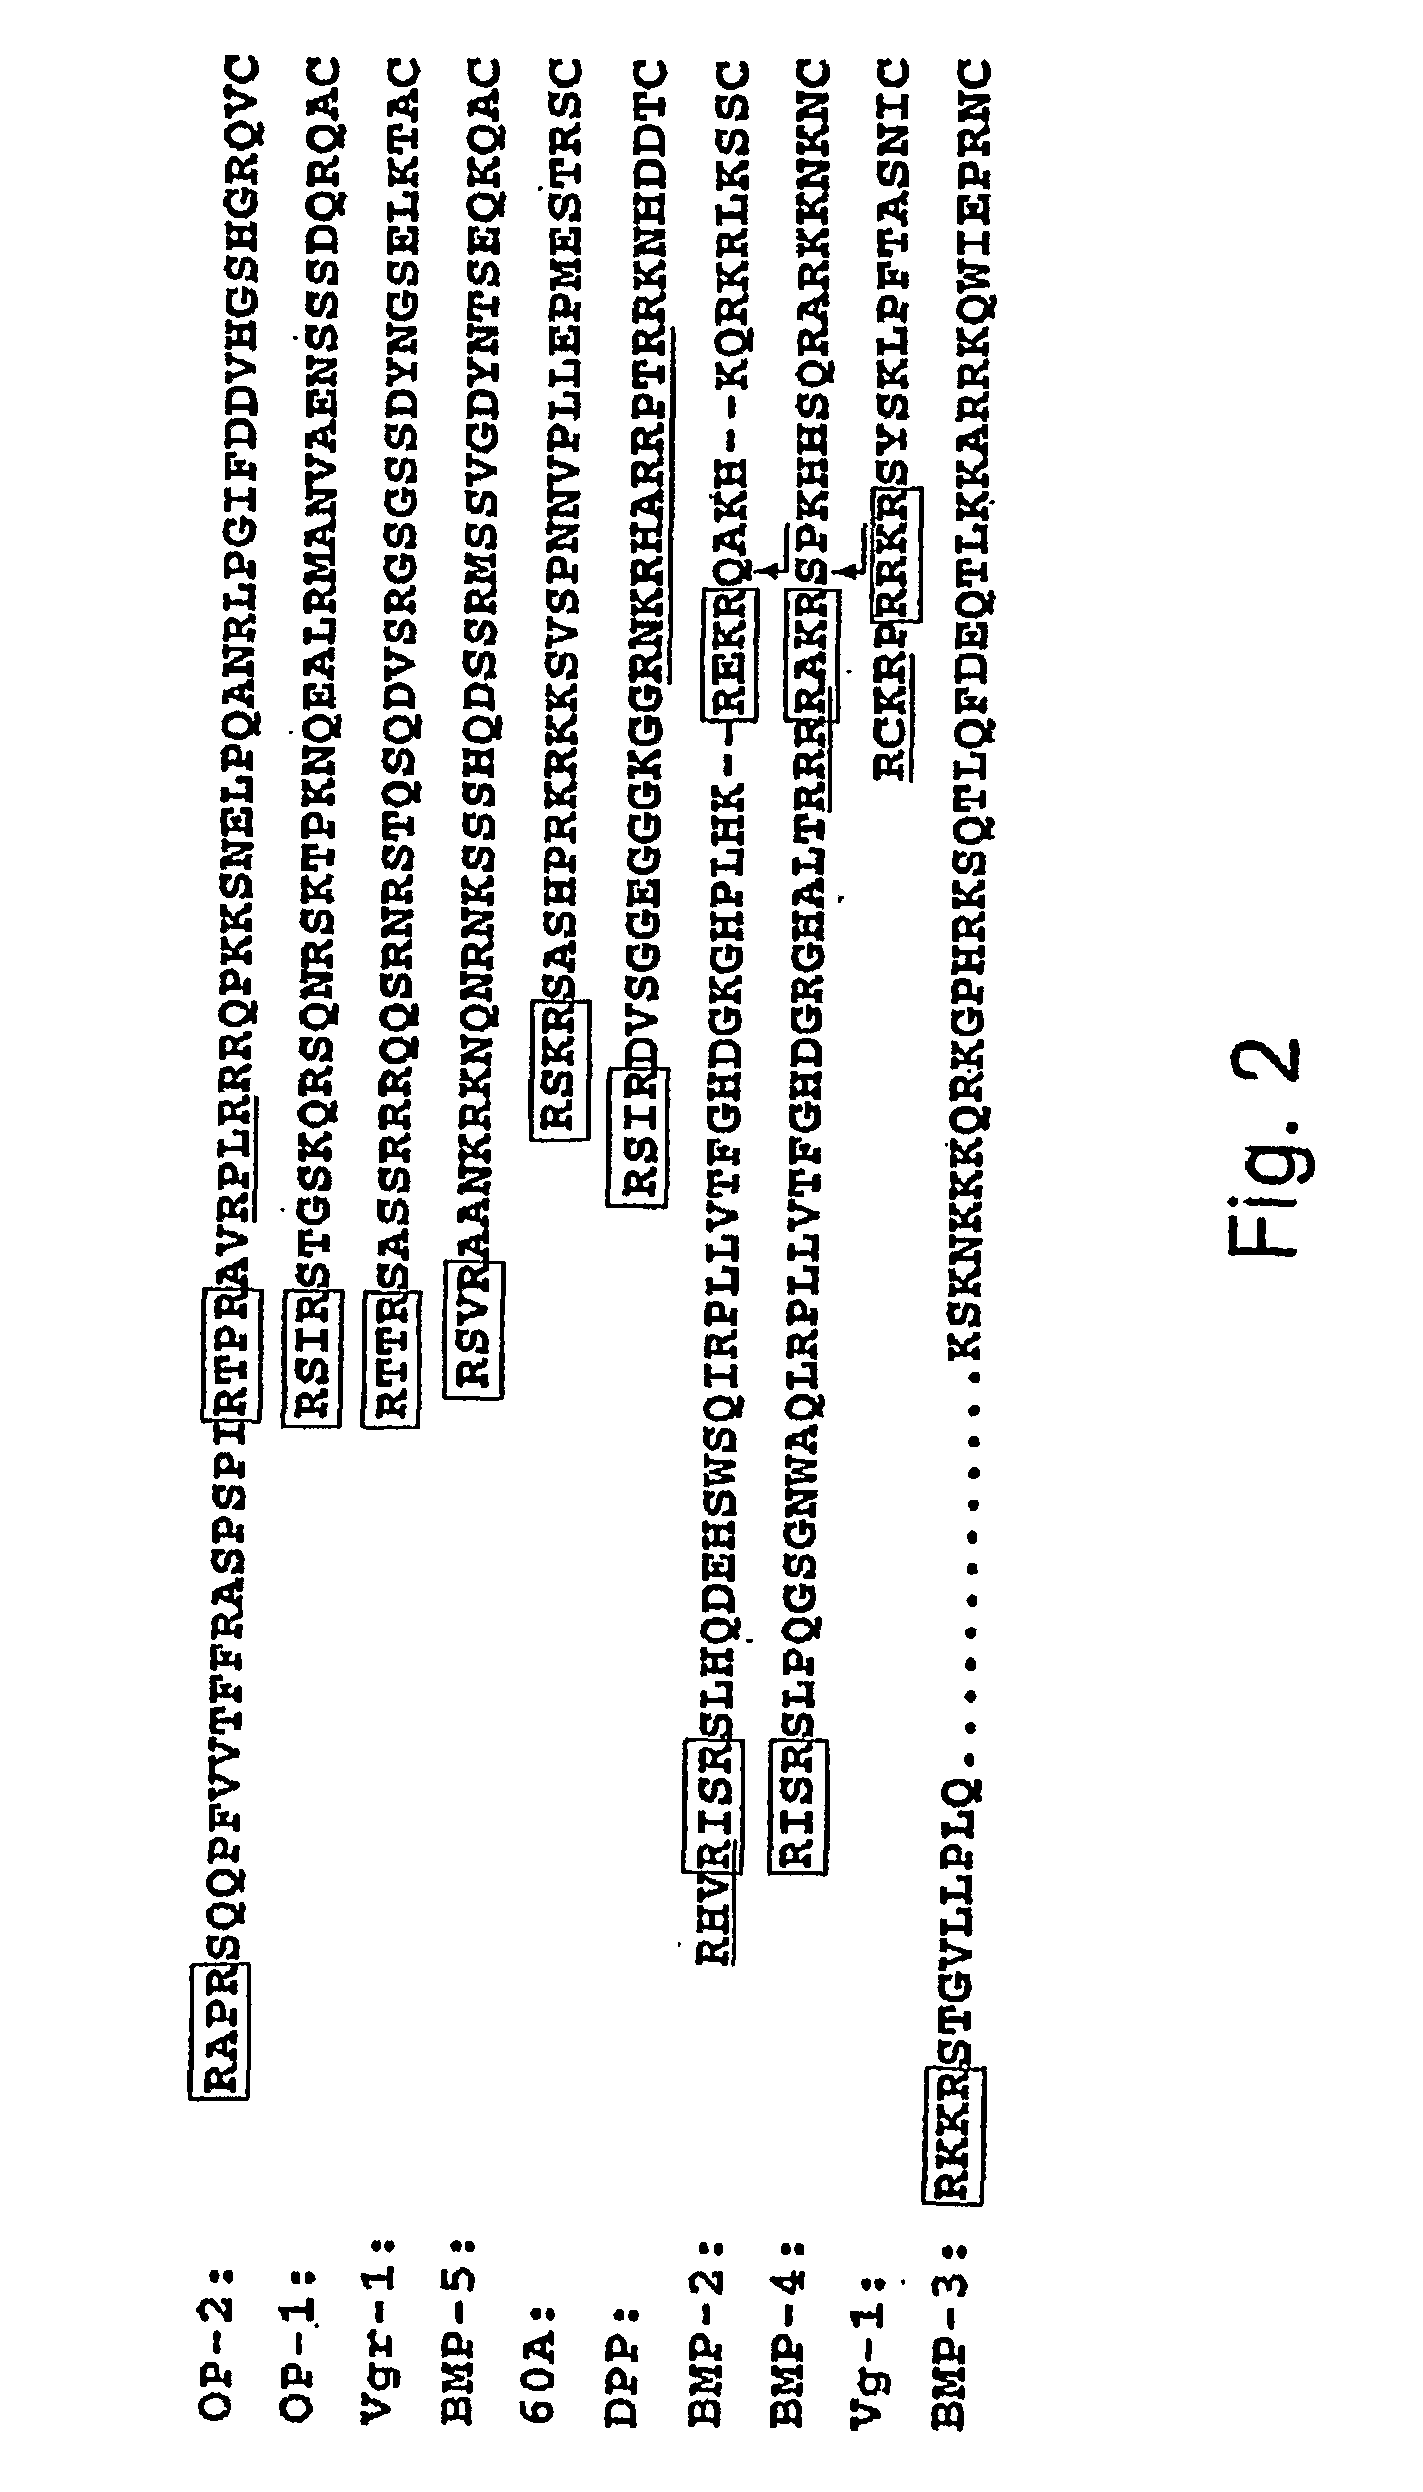 Methods of treating cartilage defects using a soluble morphogenic protein complex